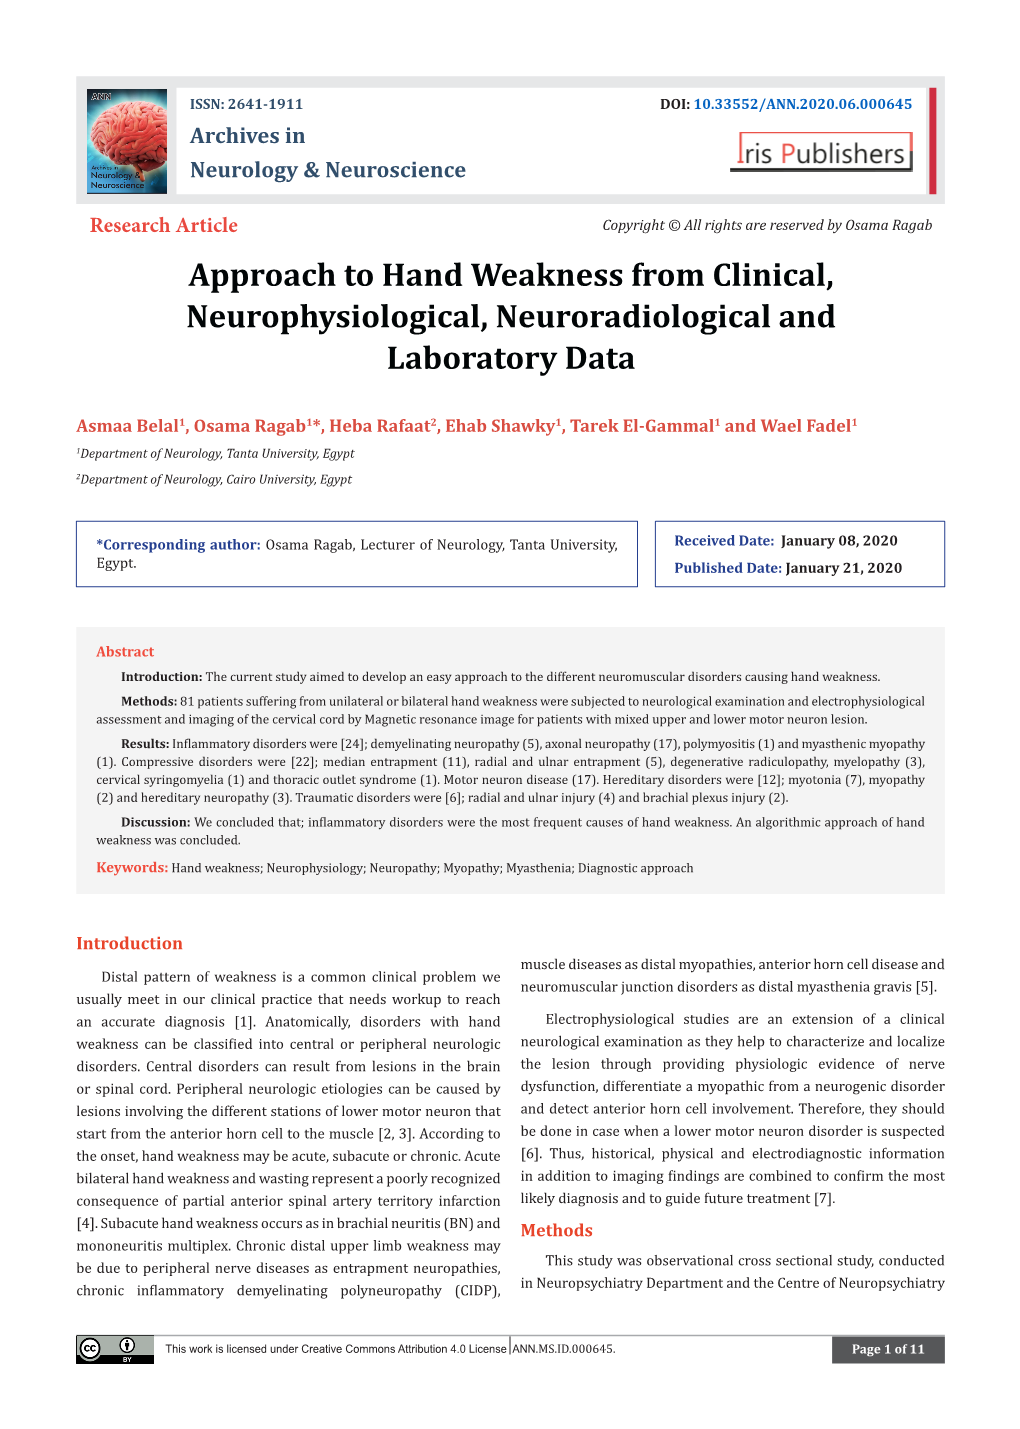 Approach to Hand Weakness from Clinical, Neurophysiological, Neuroradiological and Laboratory Data